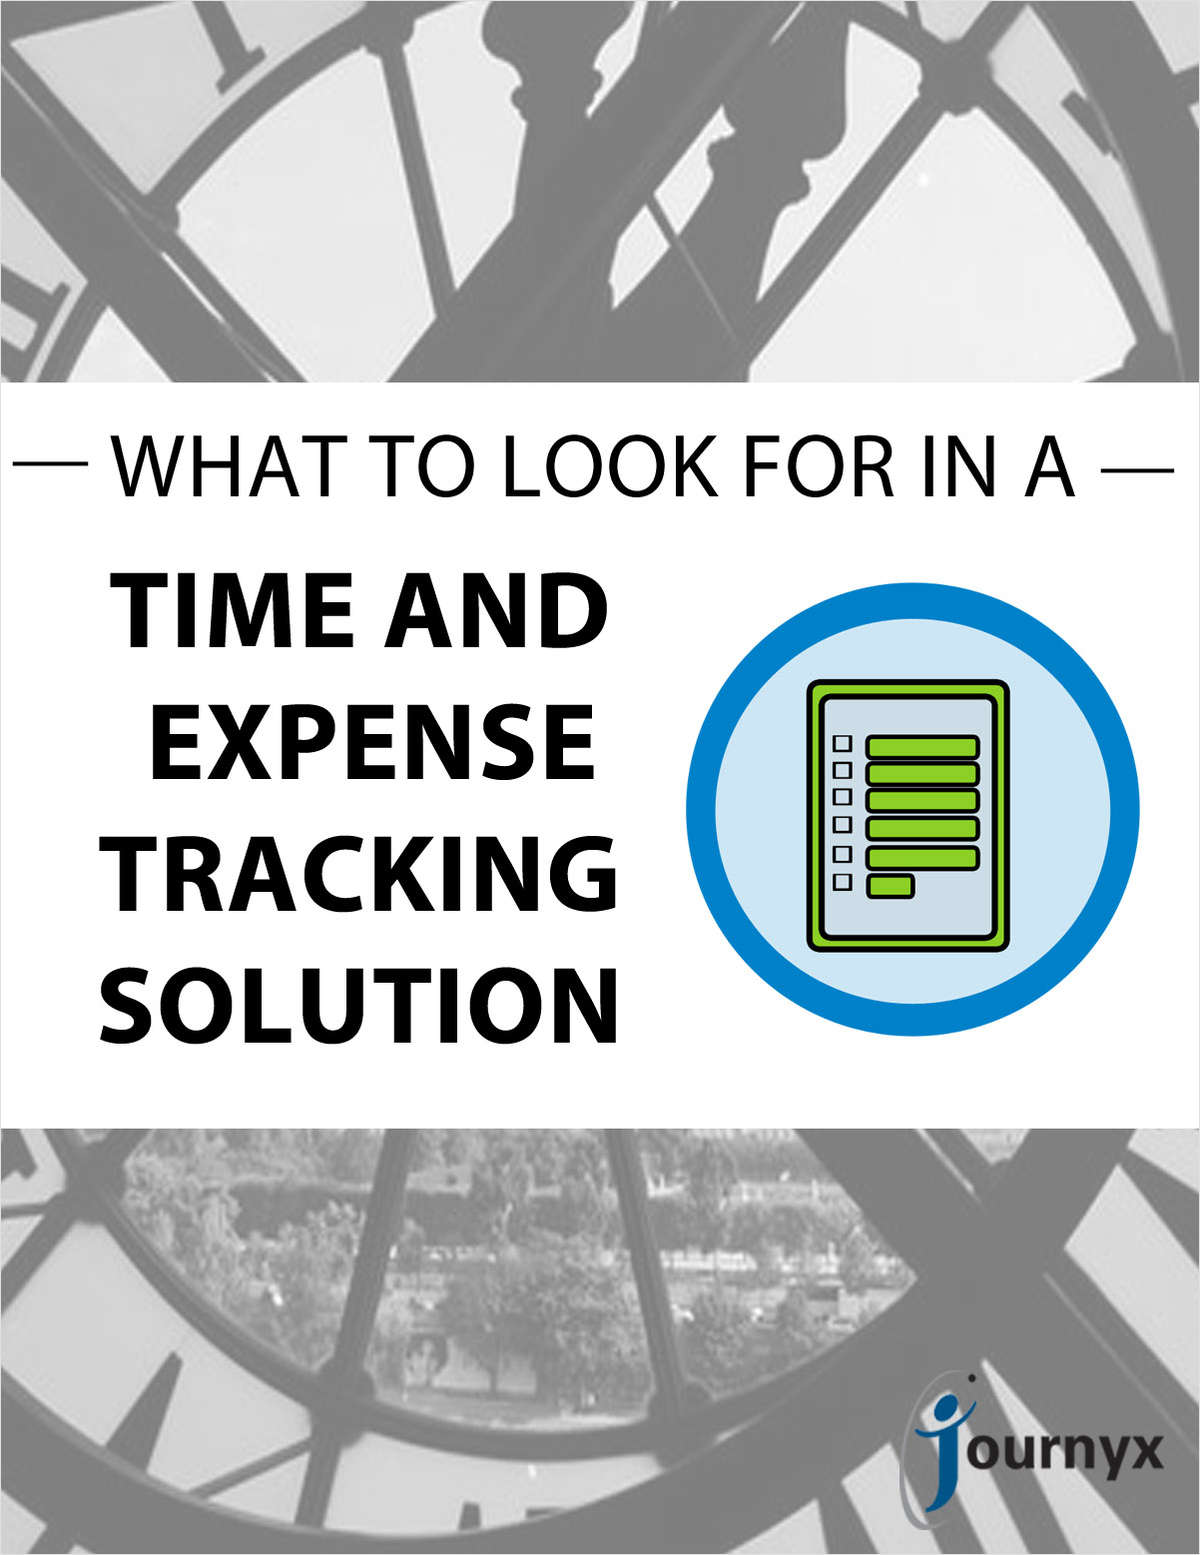 What to Look For in a Time and Expense Tracking Solution